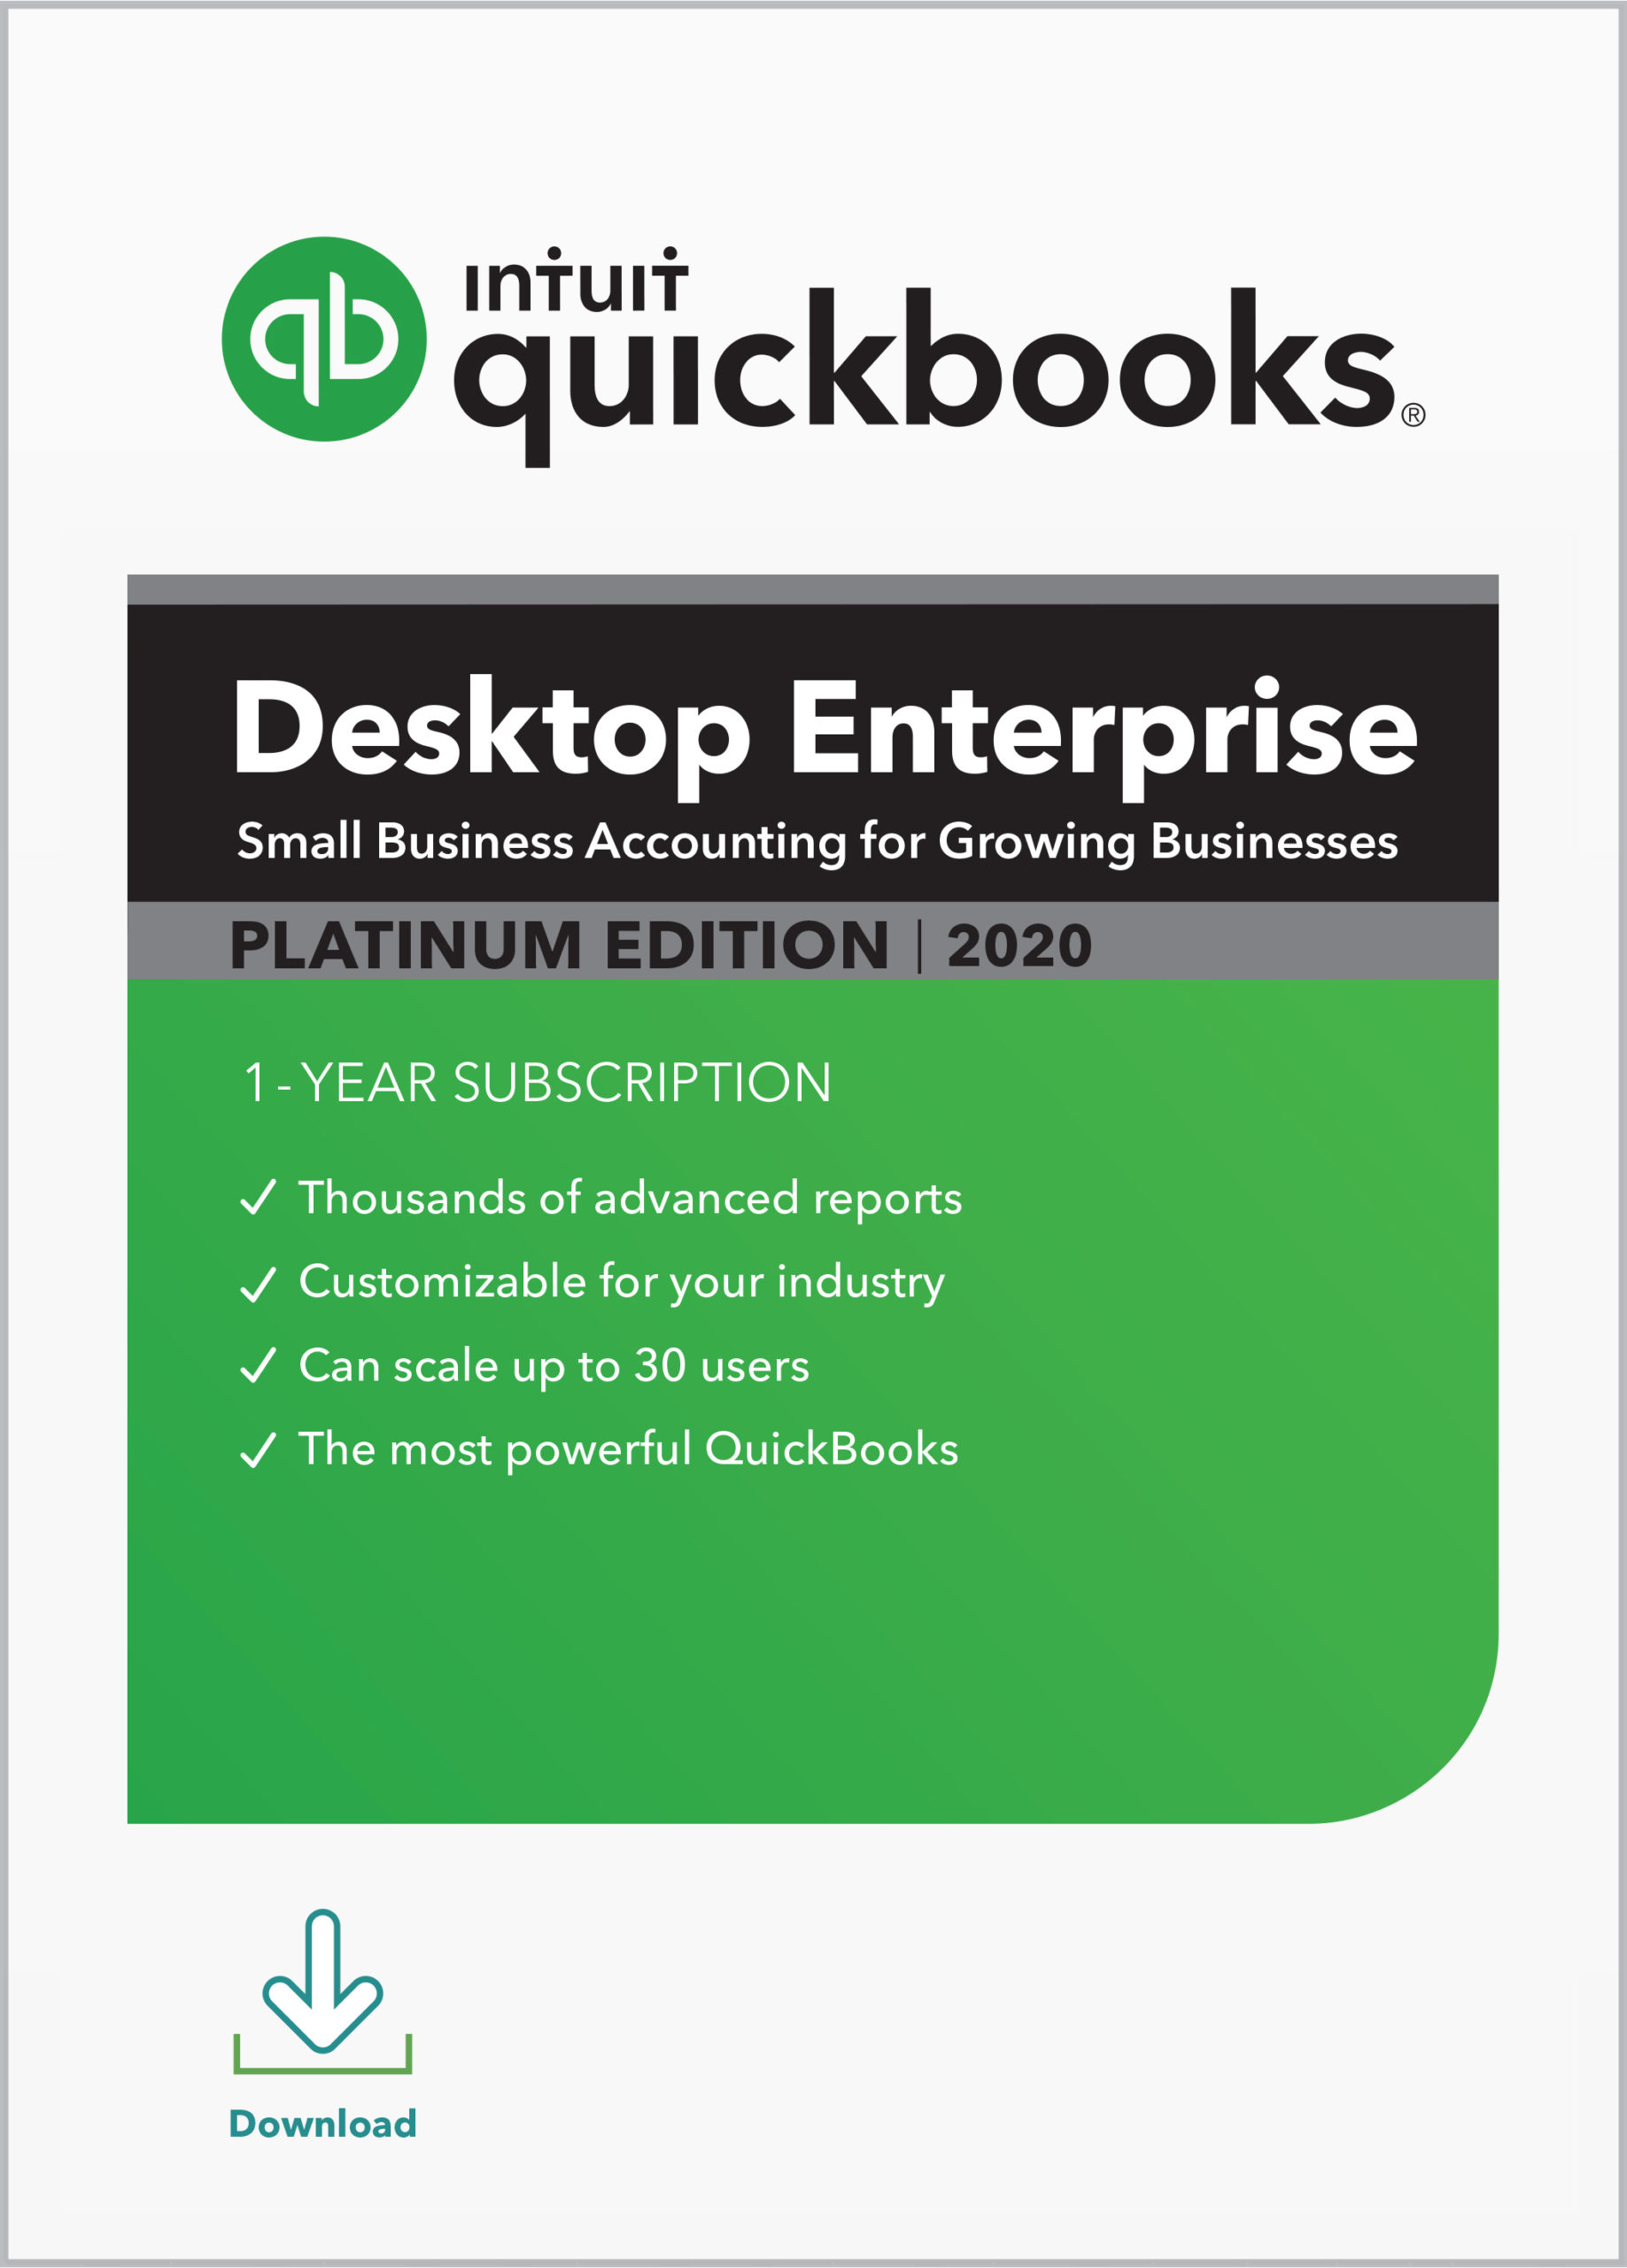 QuickBooks: | Smart Tools. Better Business.</a><br> by <a href='/profile/Bling-King/'>Bling King</a>